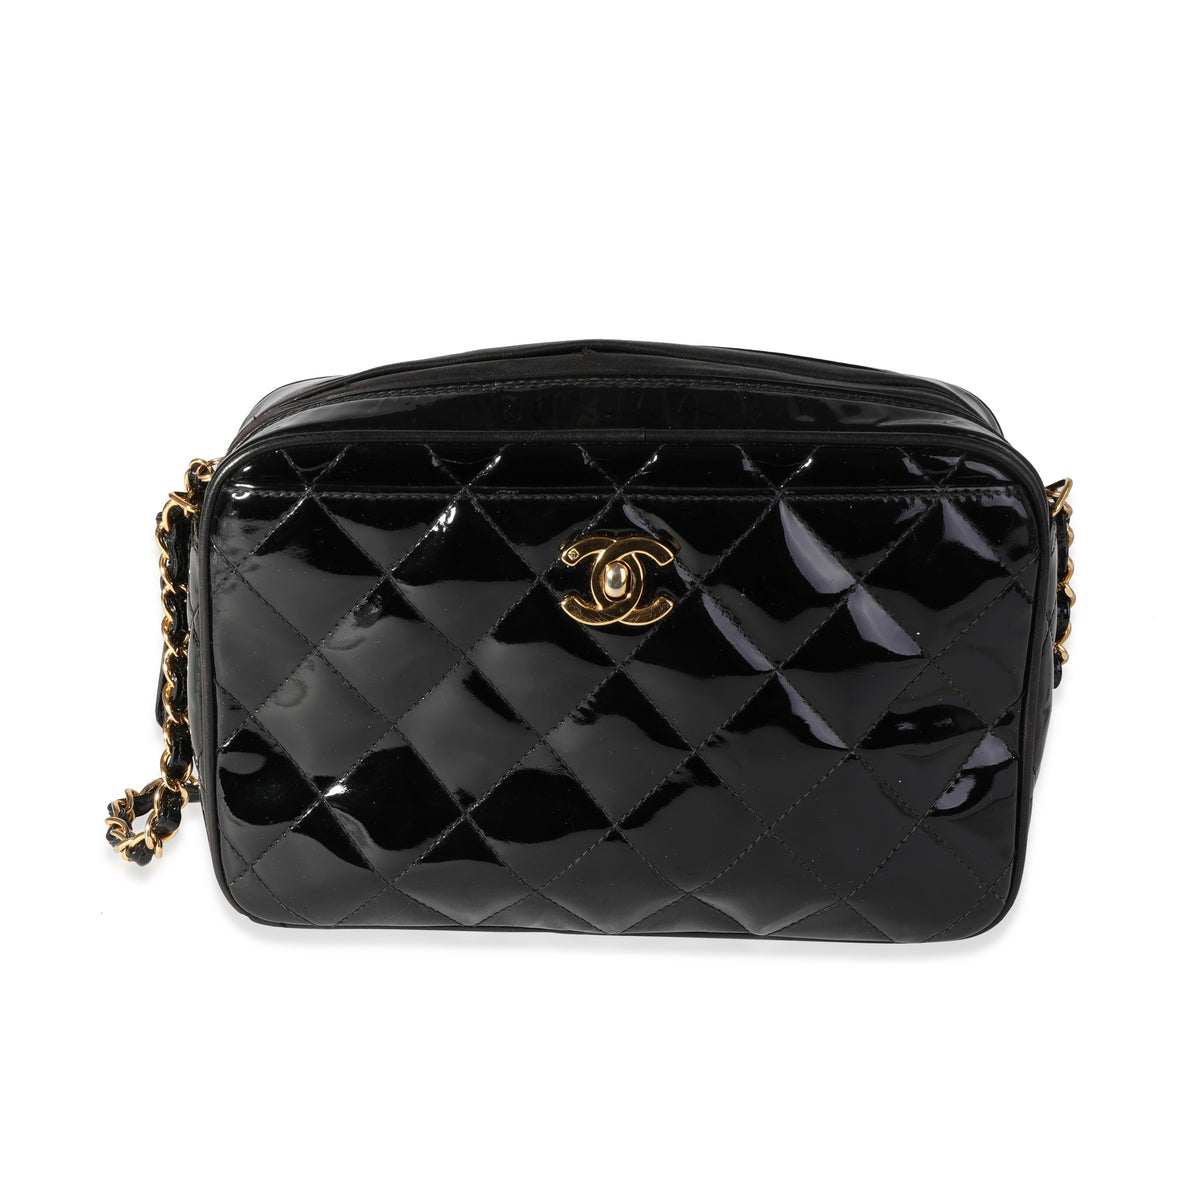 Chanel Vintage Black Quilted Patent Leather Camera Bag